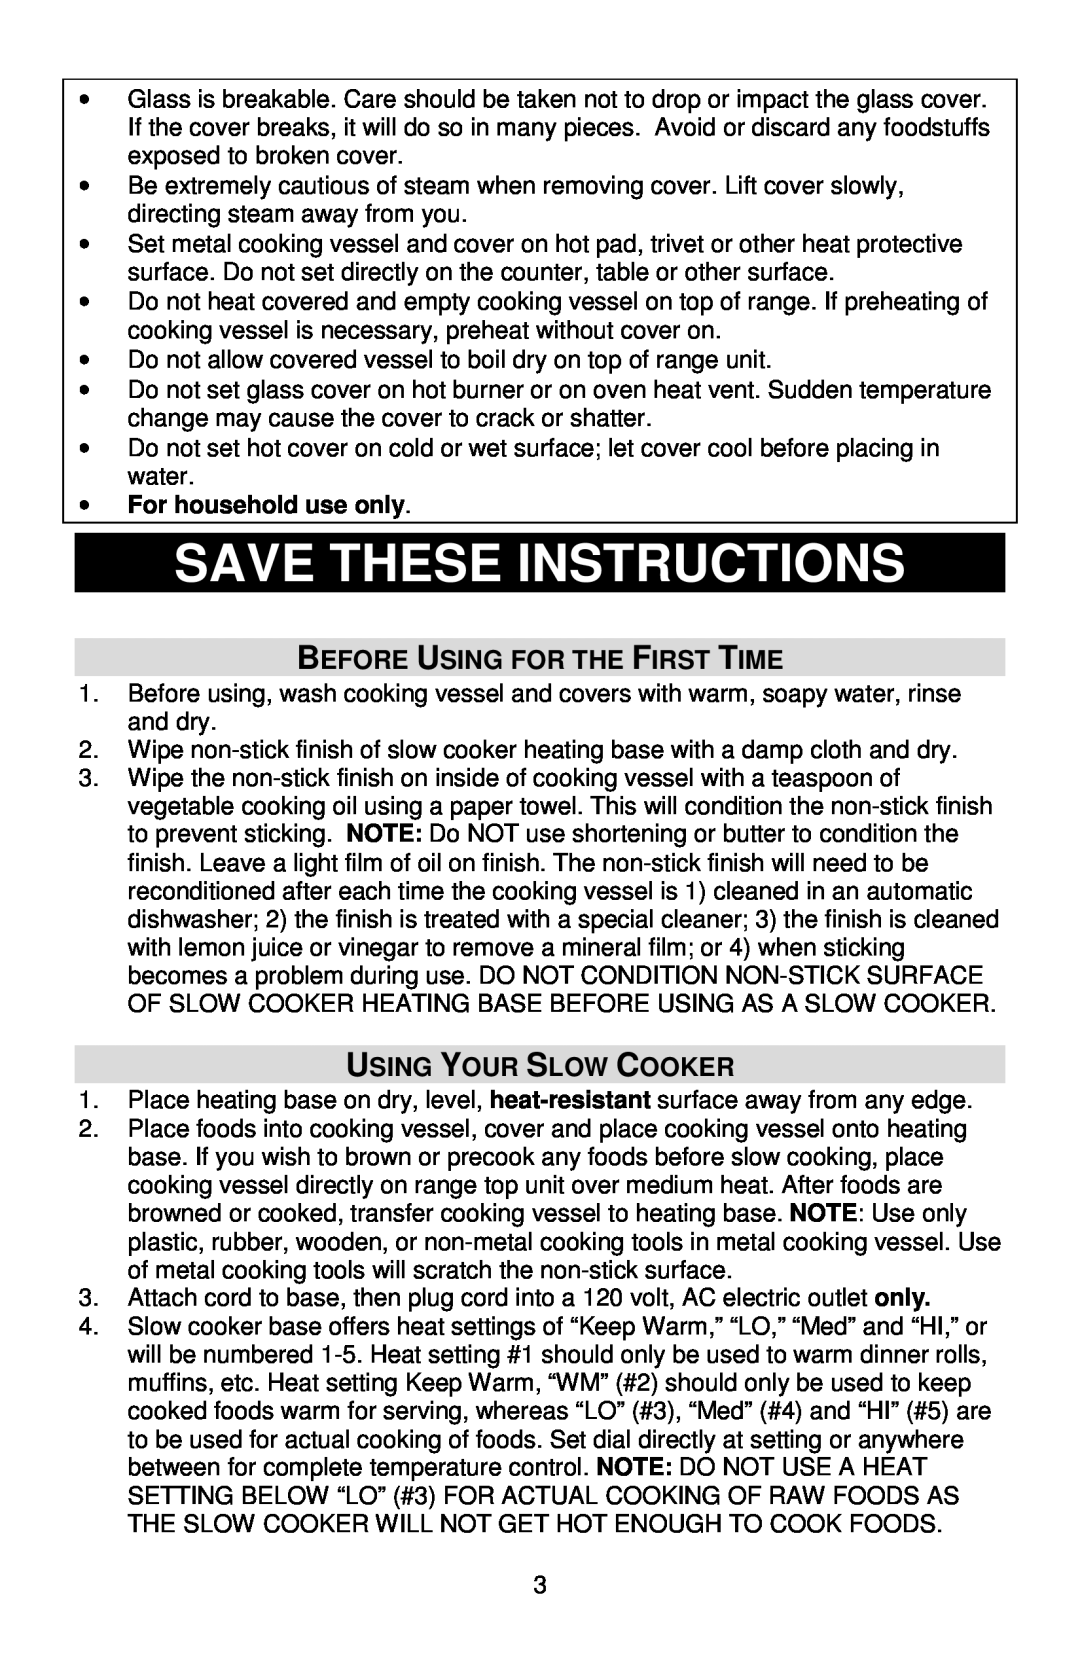 West Bend 84915 instruction manual Save These Instructions, Before Using For The First Time, Using Your Slow Cooker 